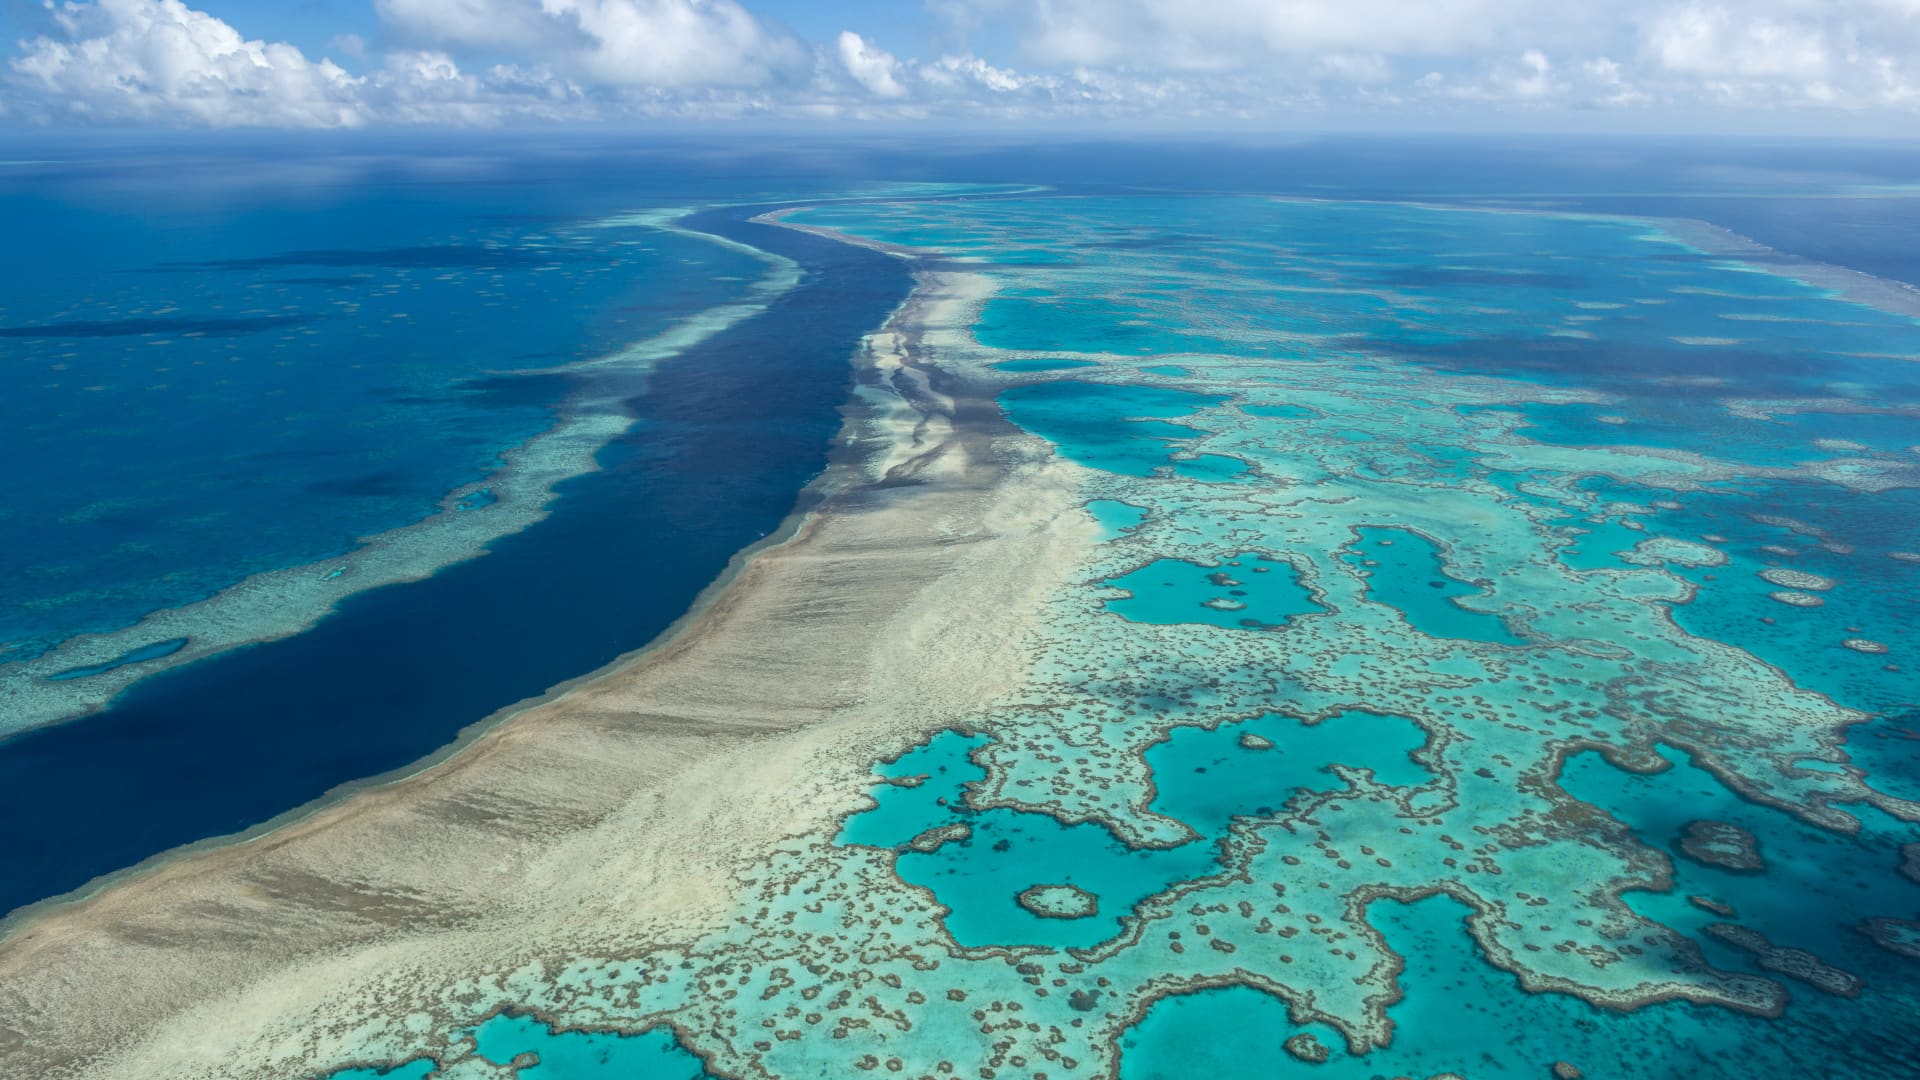 Parts of Great Barrier Reef show highest coral cover seen in 36 years